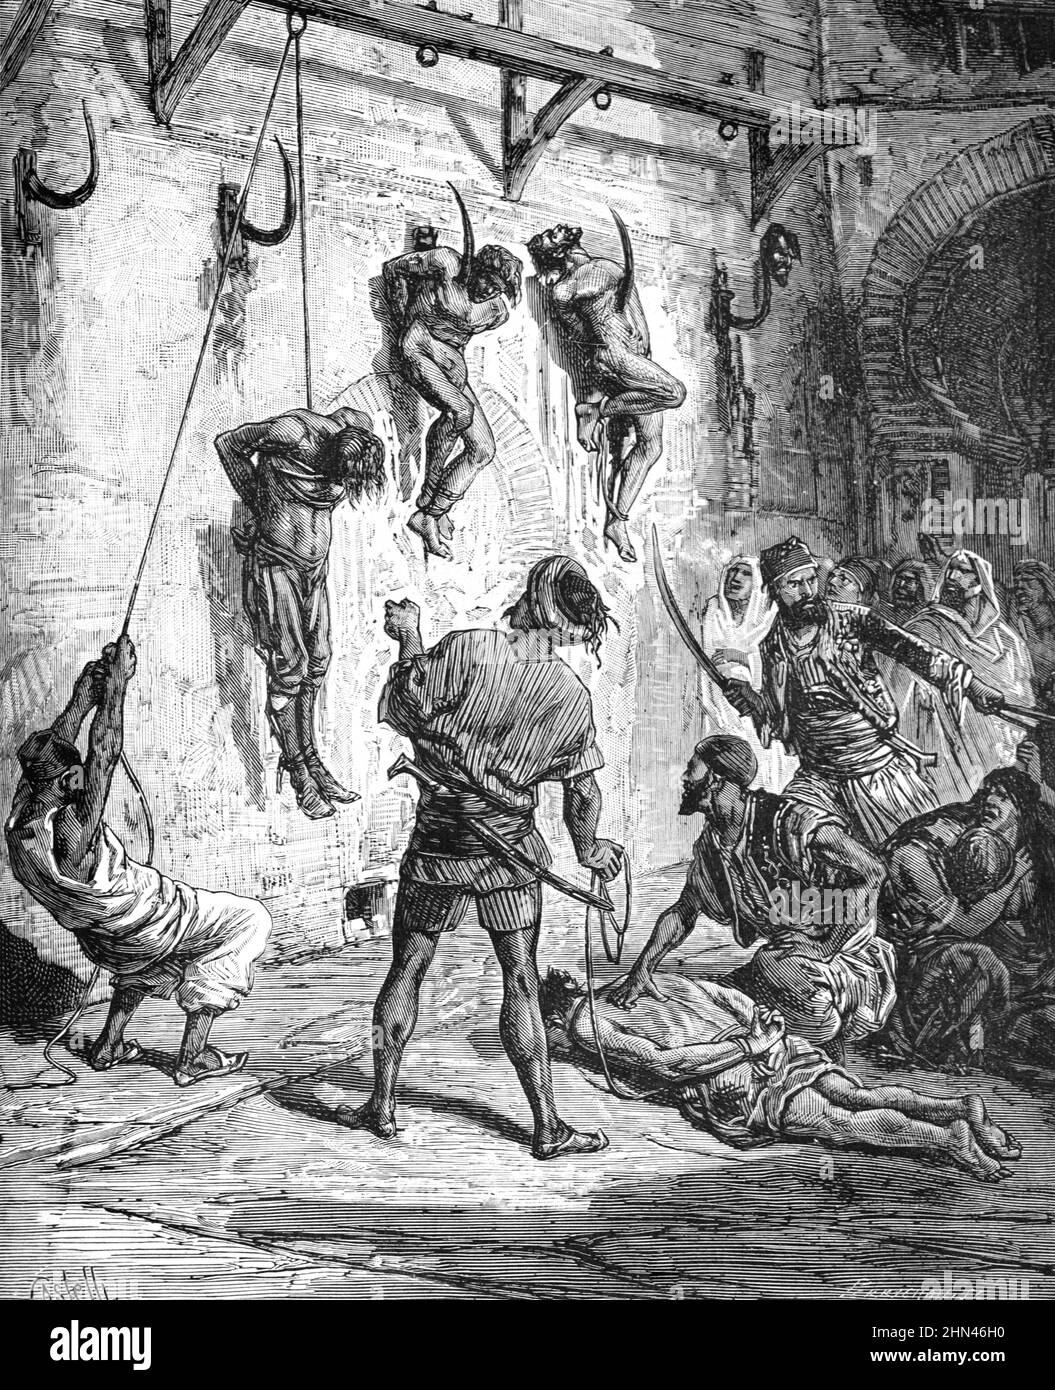 Criminals are Impaled and Hanged from Town Walls of Tunis. Punishment & Torture in Tunisia. Vintage Illustration or Engraving 1881 (Castelli) Stock Photo